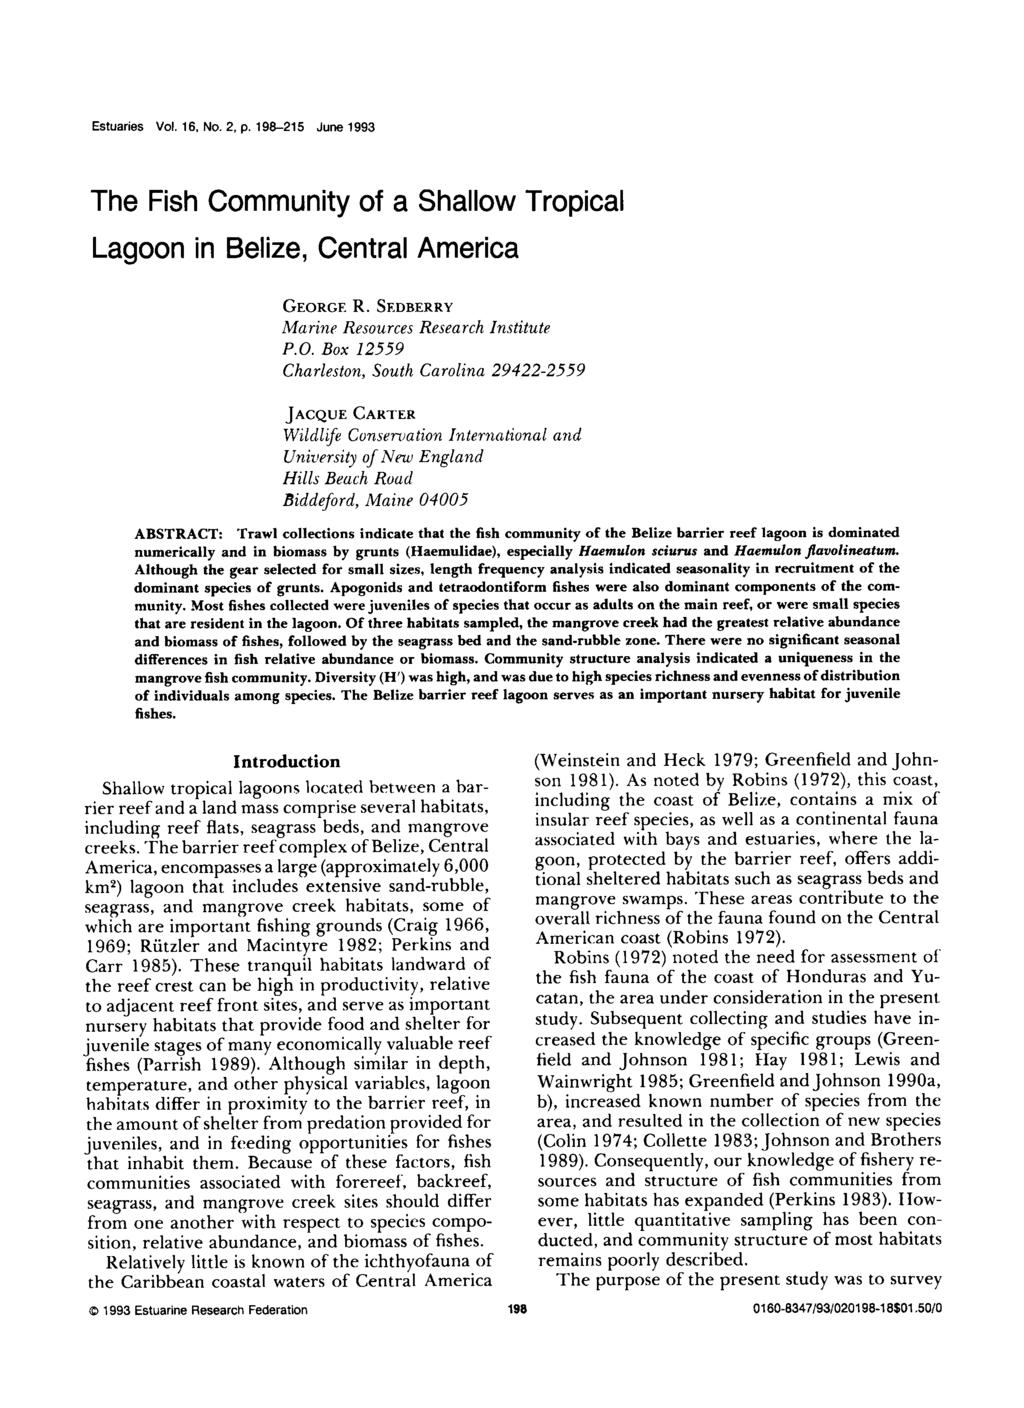 Estuaries Vol. 16, No. 2, p. 198-215 June 1993 The Fish Community of a Shallow Tropical Lagoon in Belize, Central America GEOR